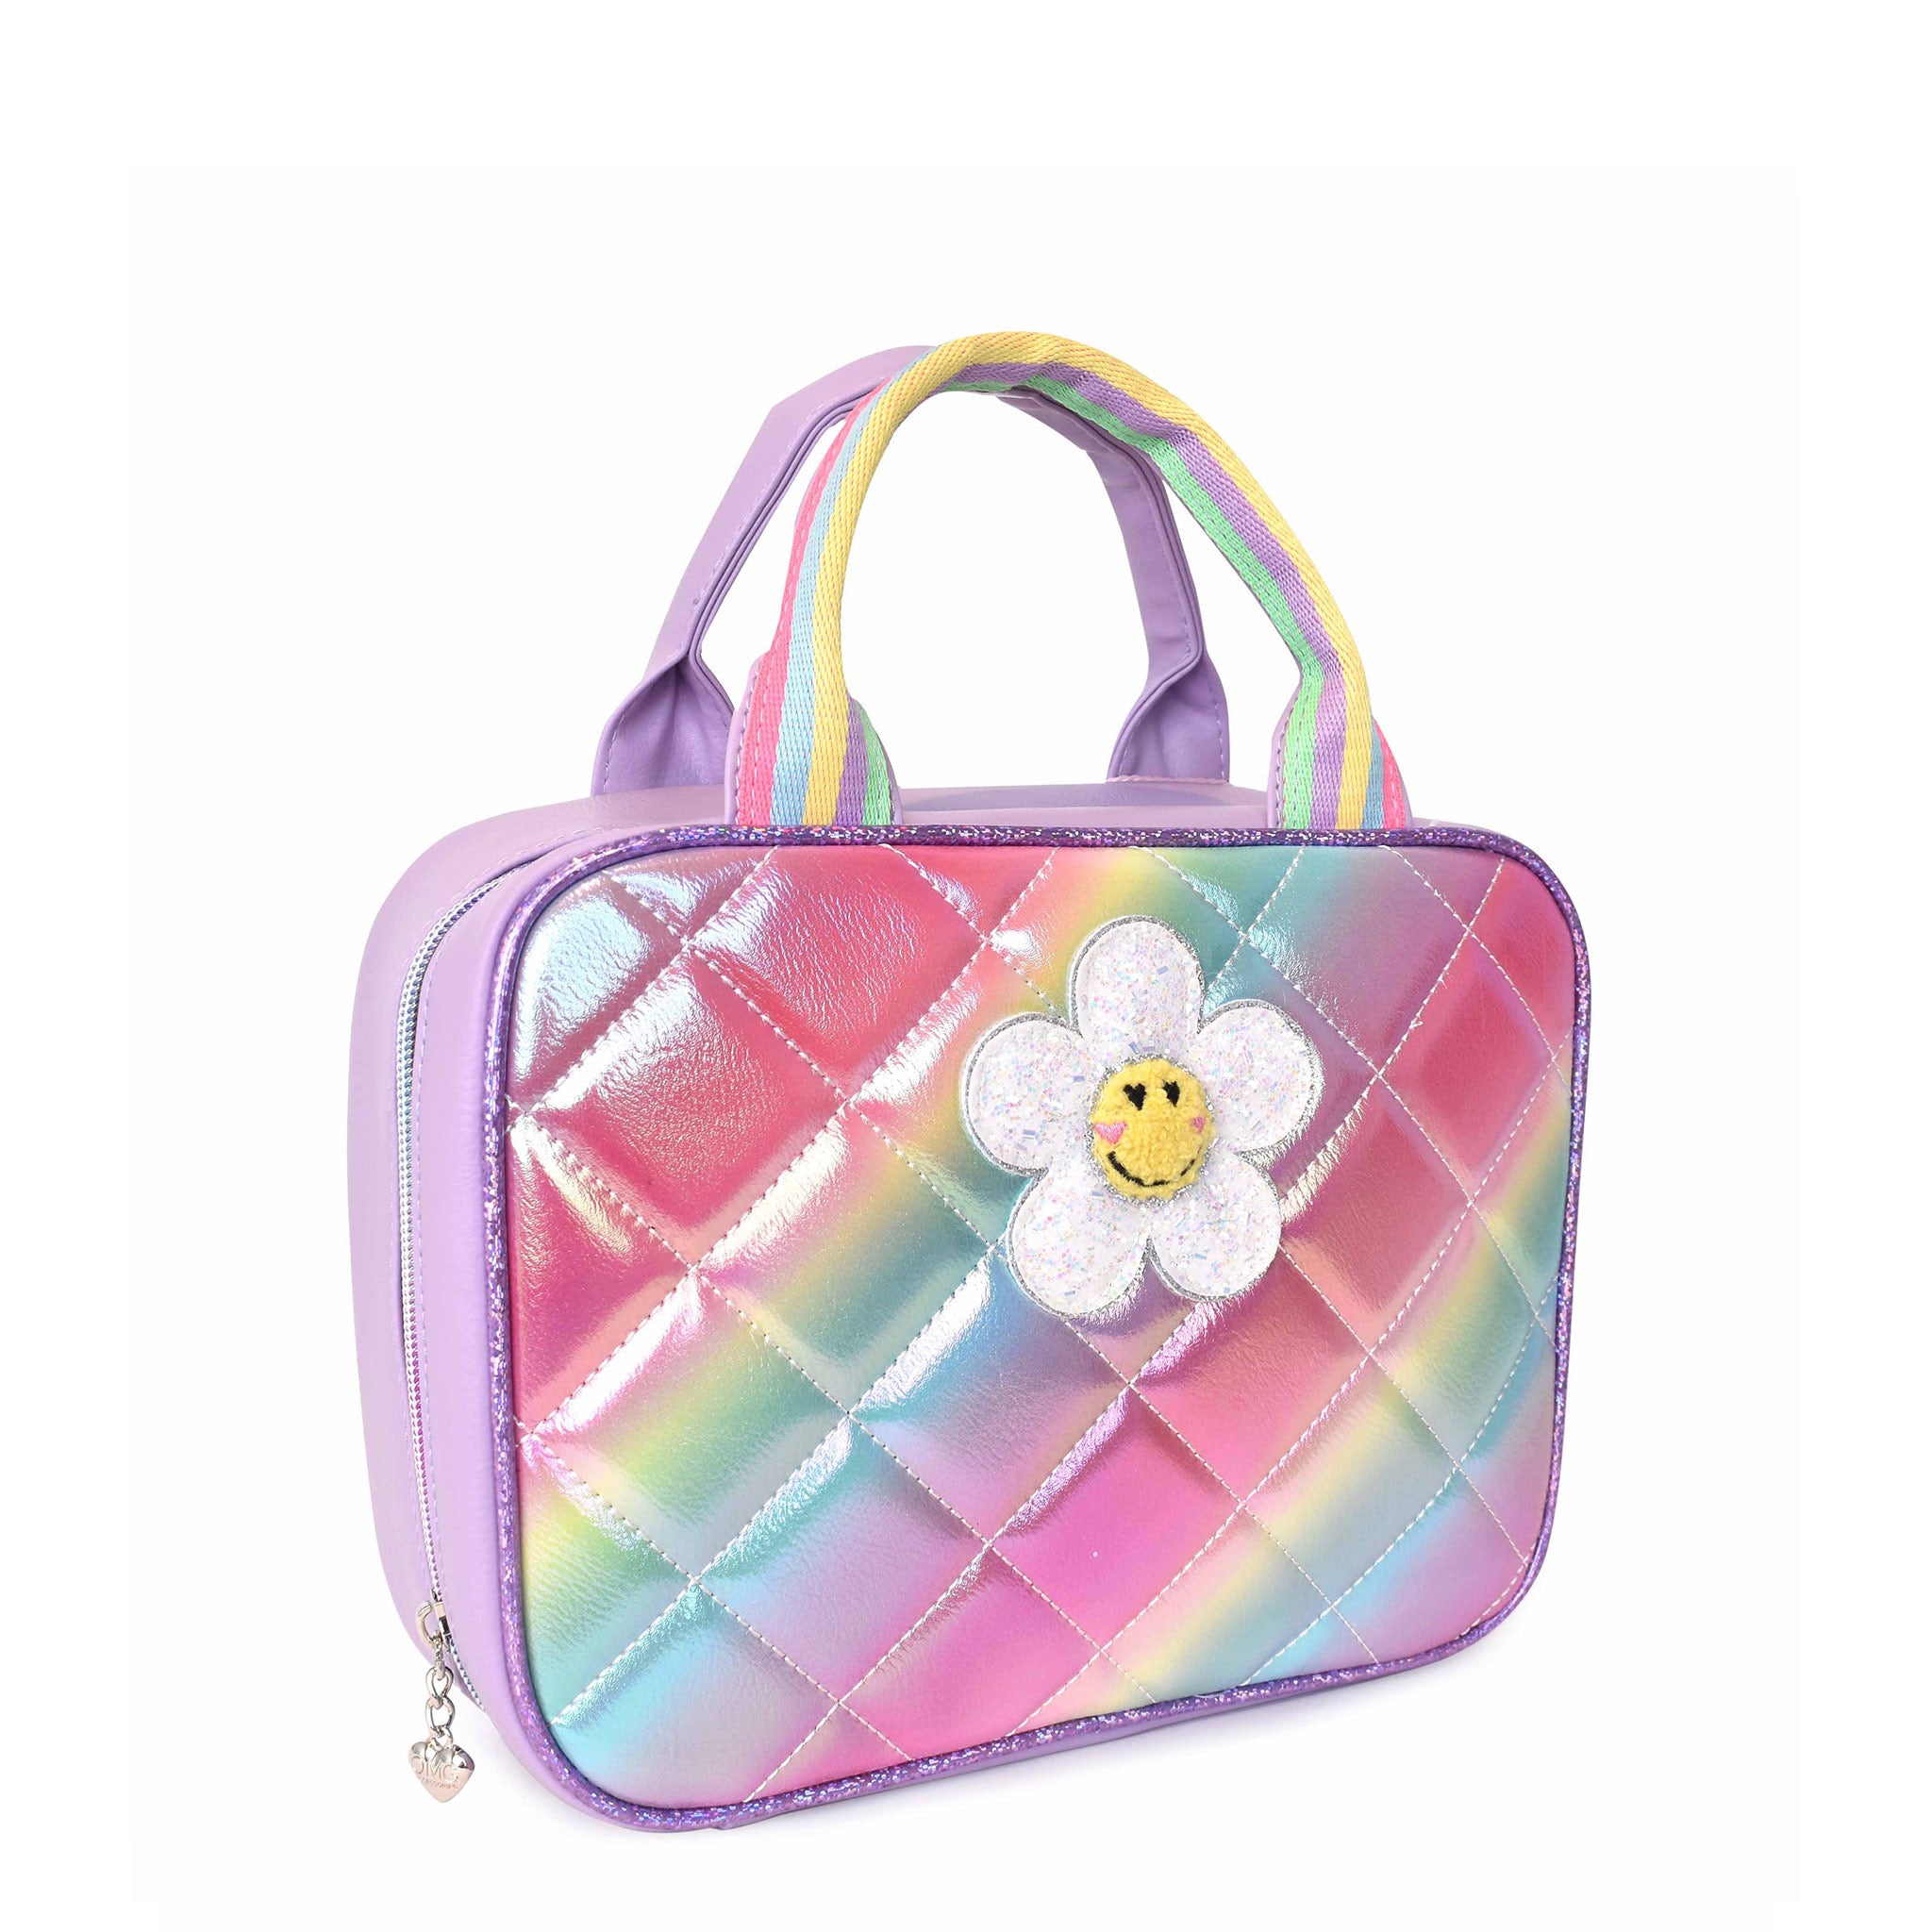 Side view of a metallic ombre quilted rectangular lunch bag with a glitter daisy applique